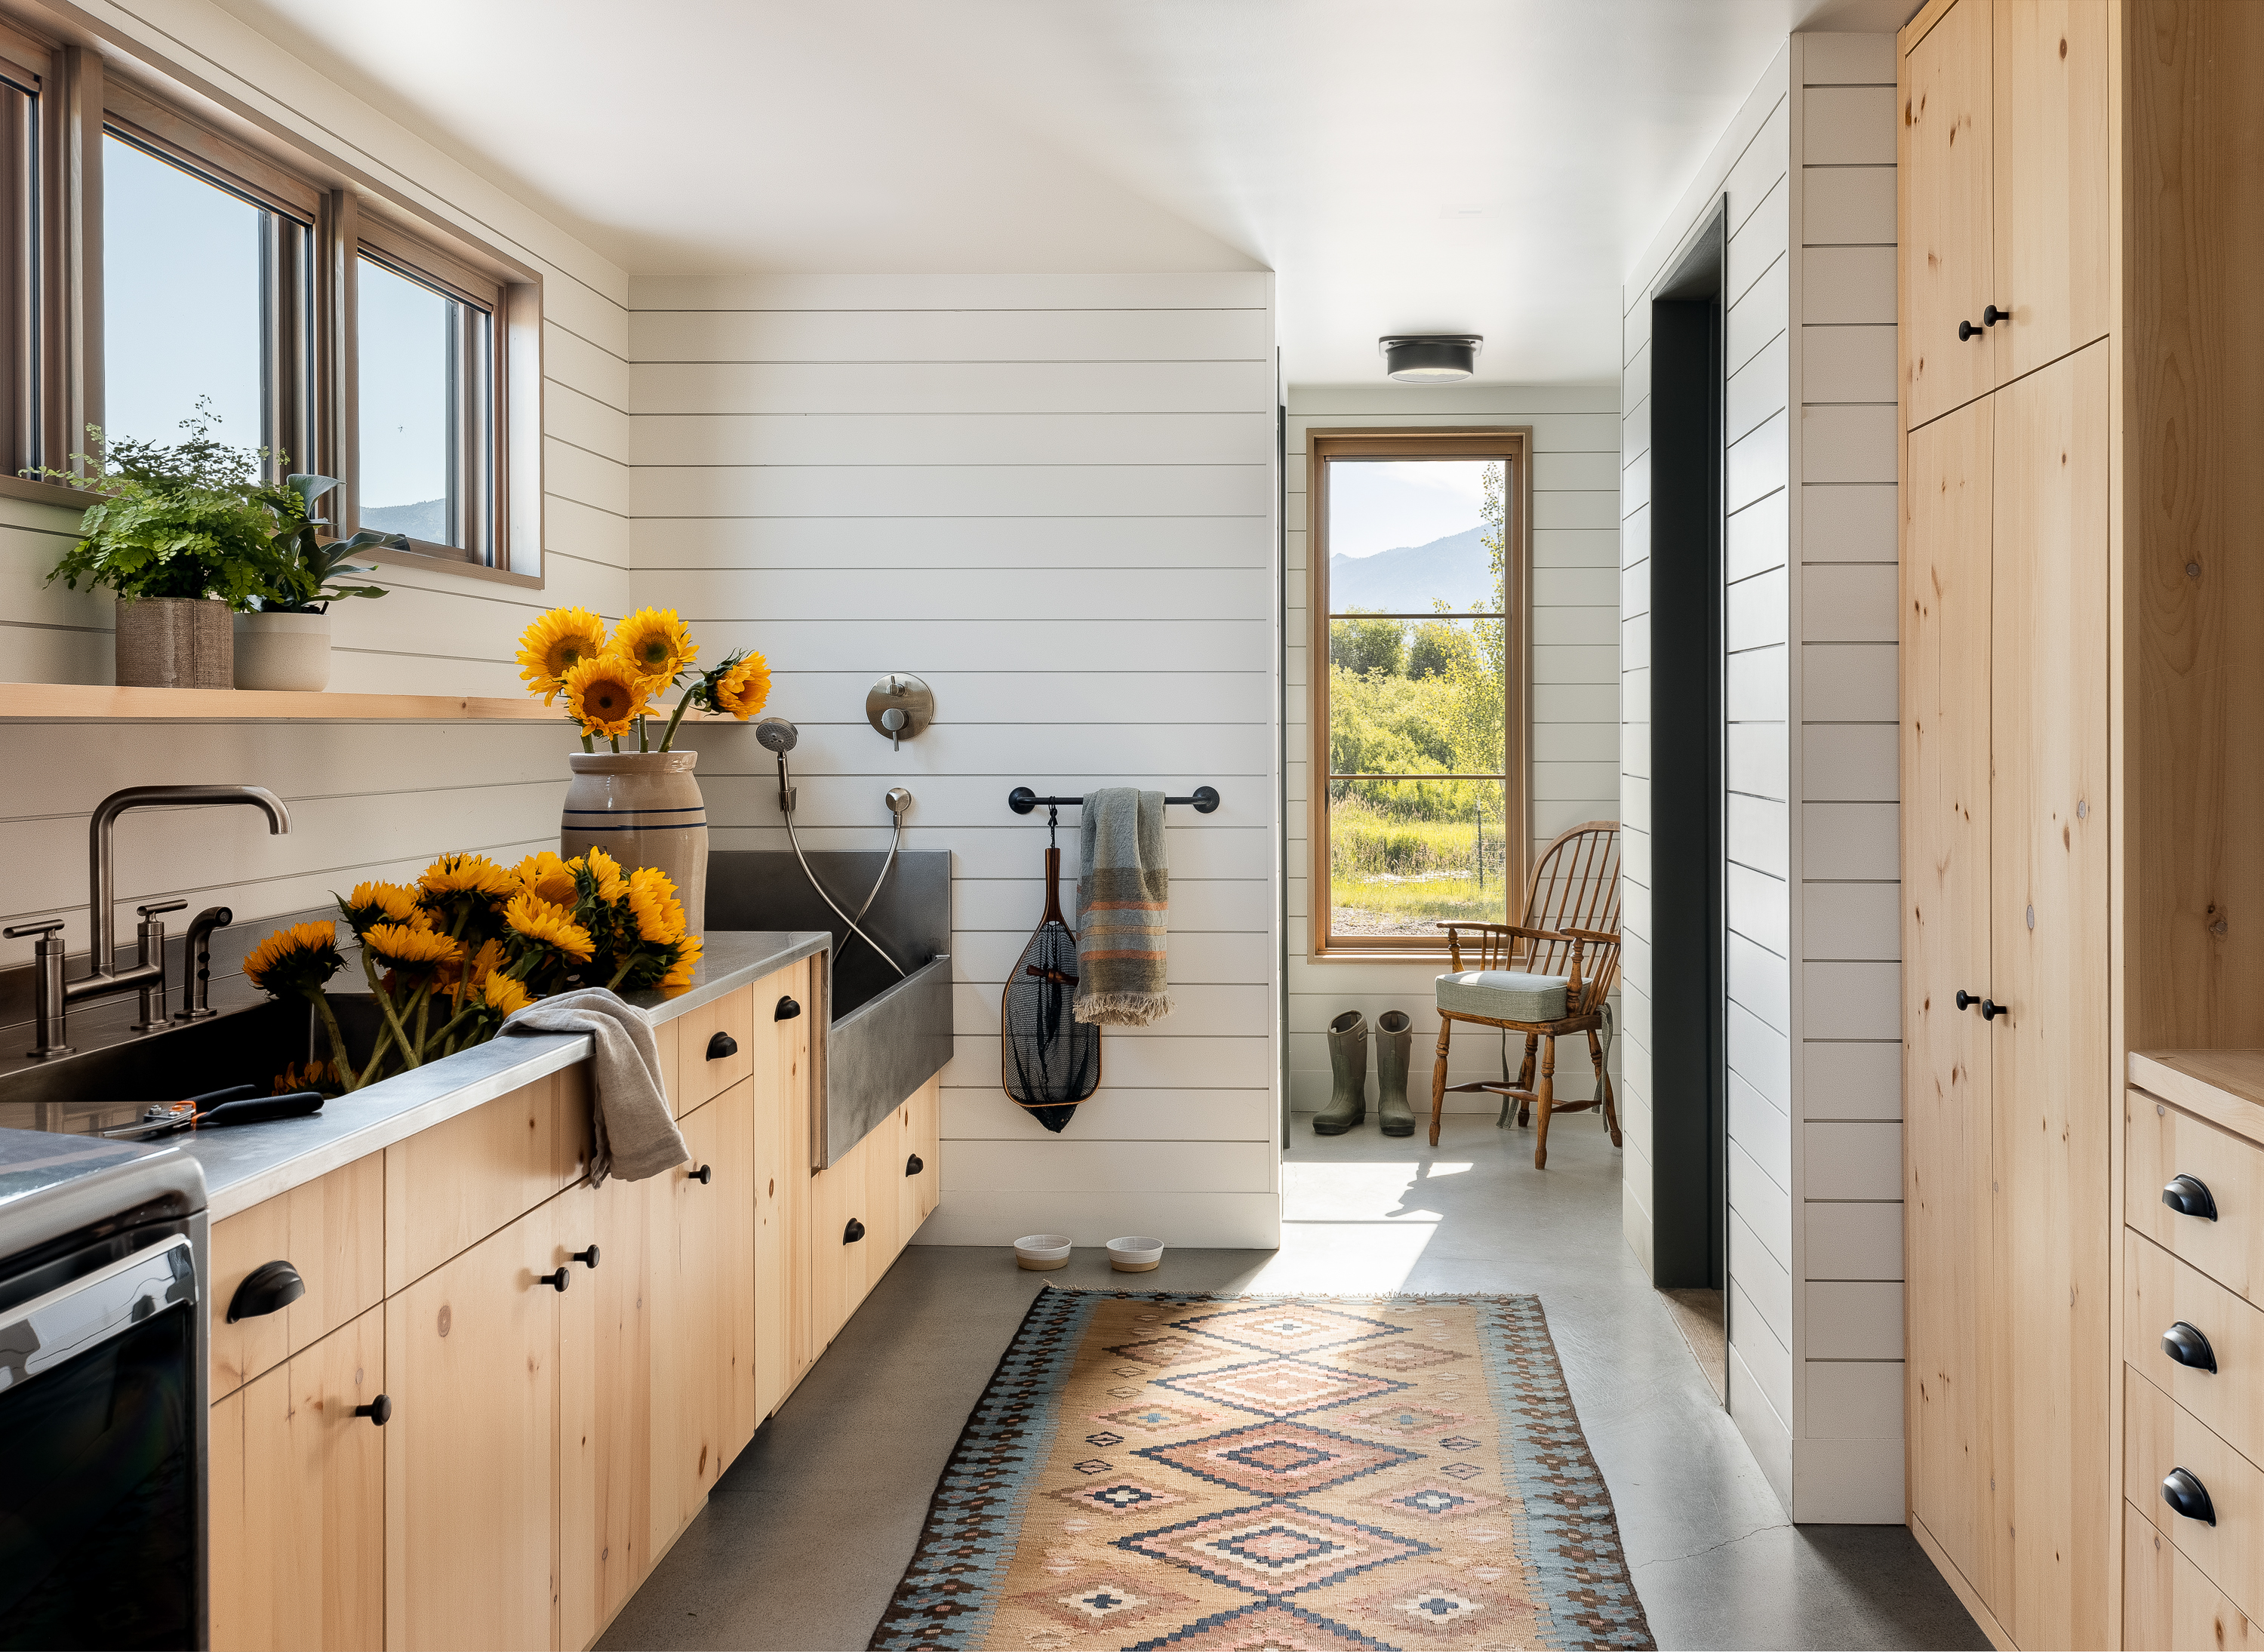 Bright Mudroom with shiplap paneling and natural pine cabinets. Sun flowers resting in the sink.